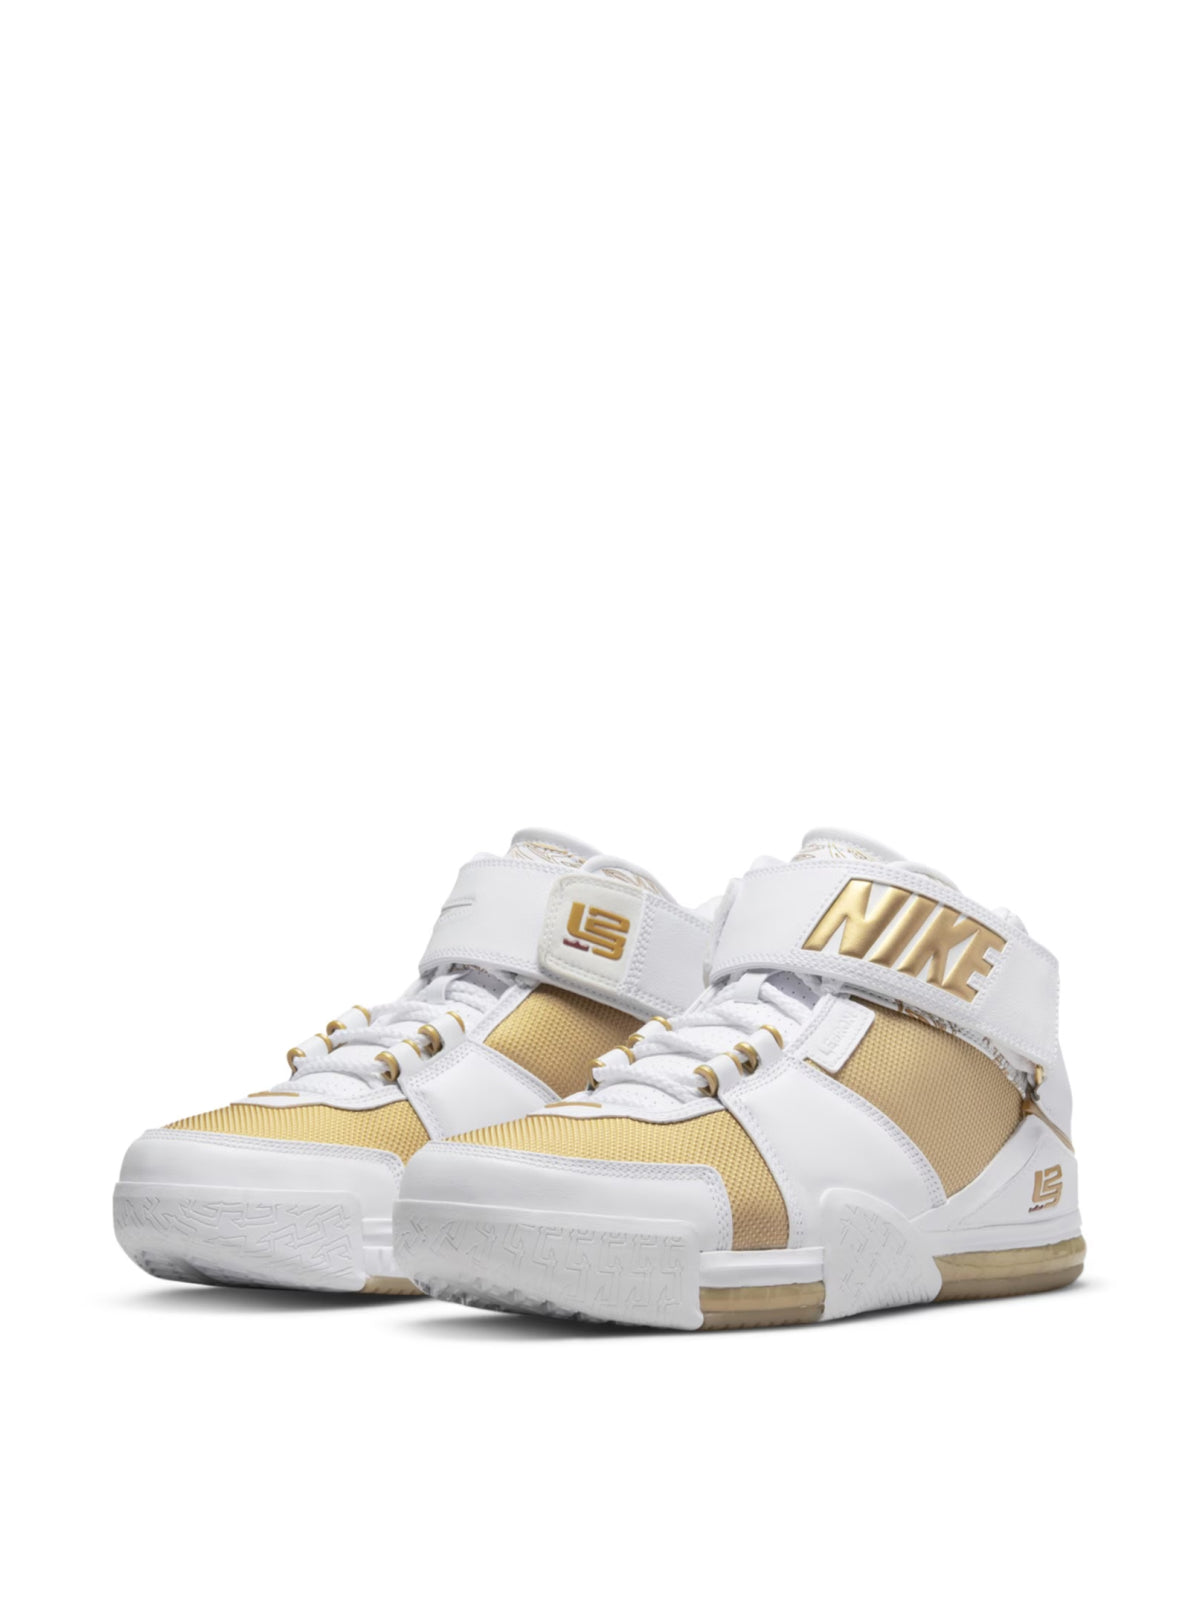 Nike-OUTLET-SALE-Zoom LeBron II Sneakers-ARCHIVIST